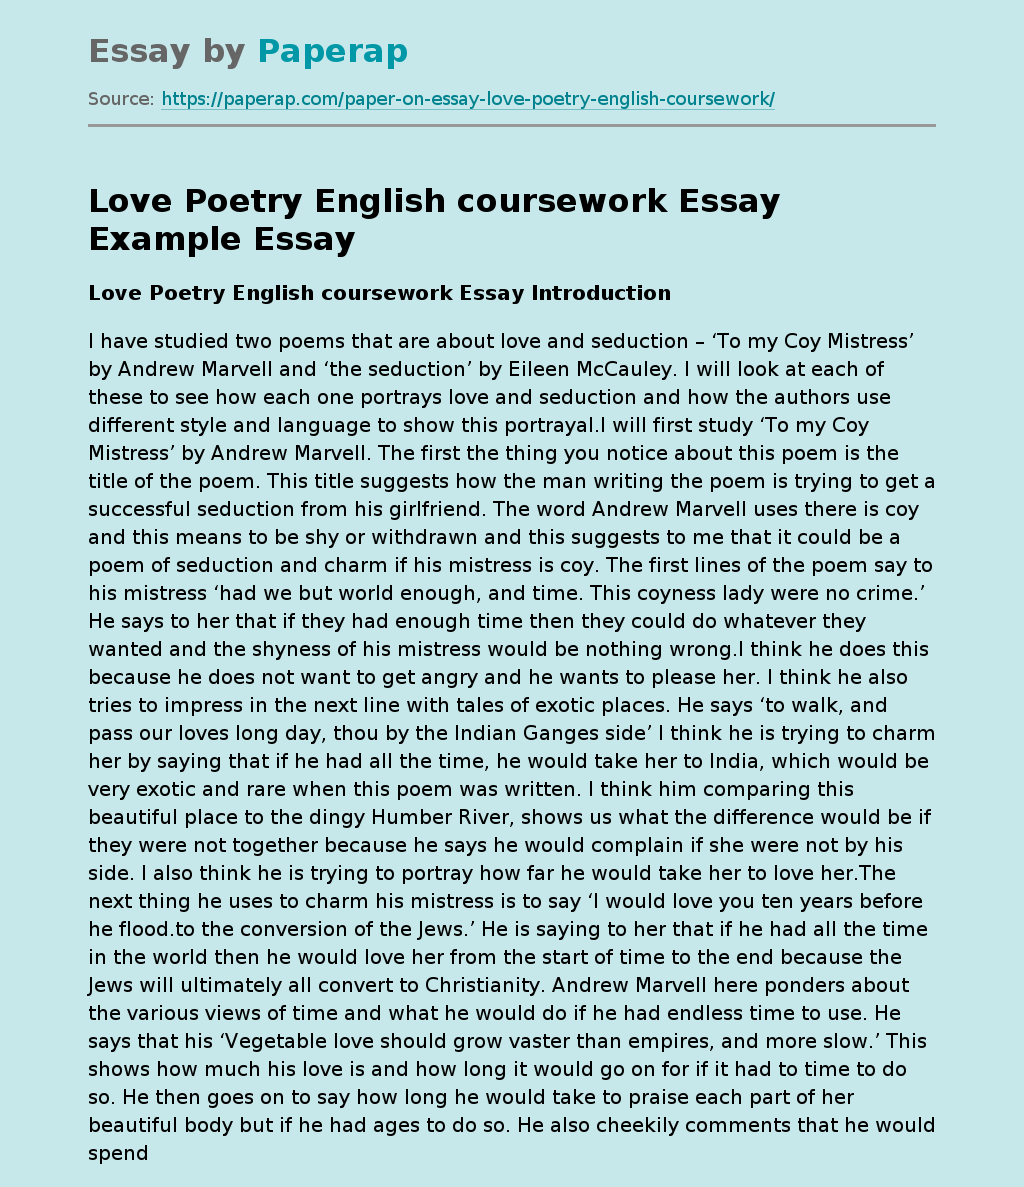 Love Poetry English coursework Essay Example